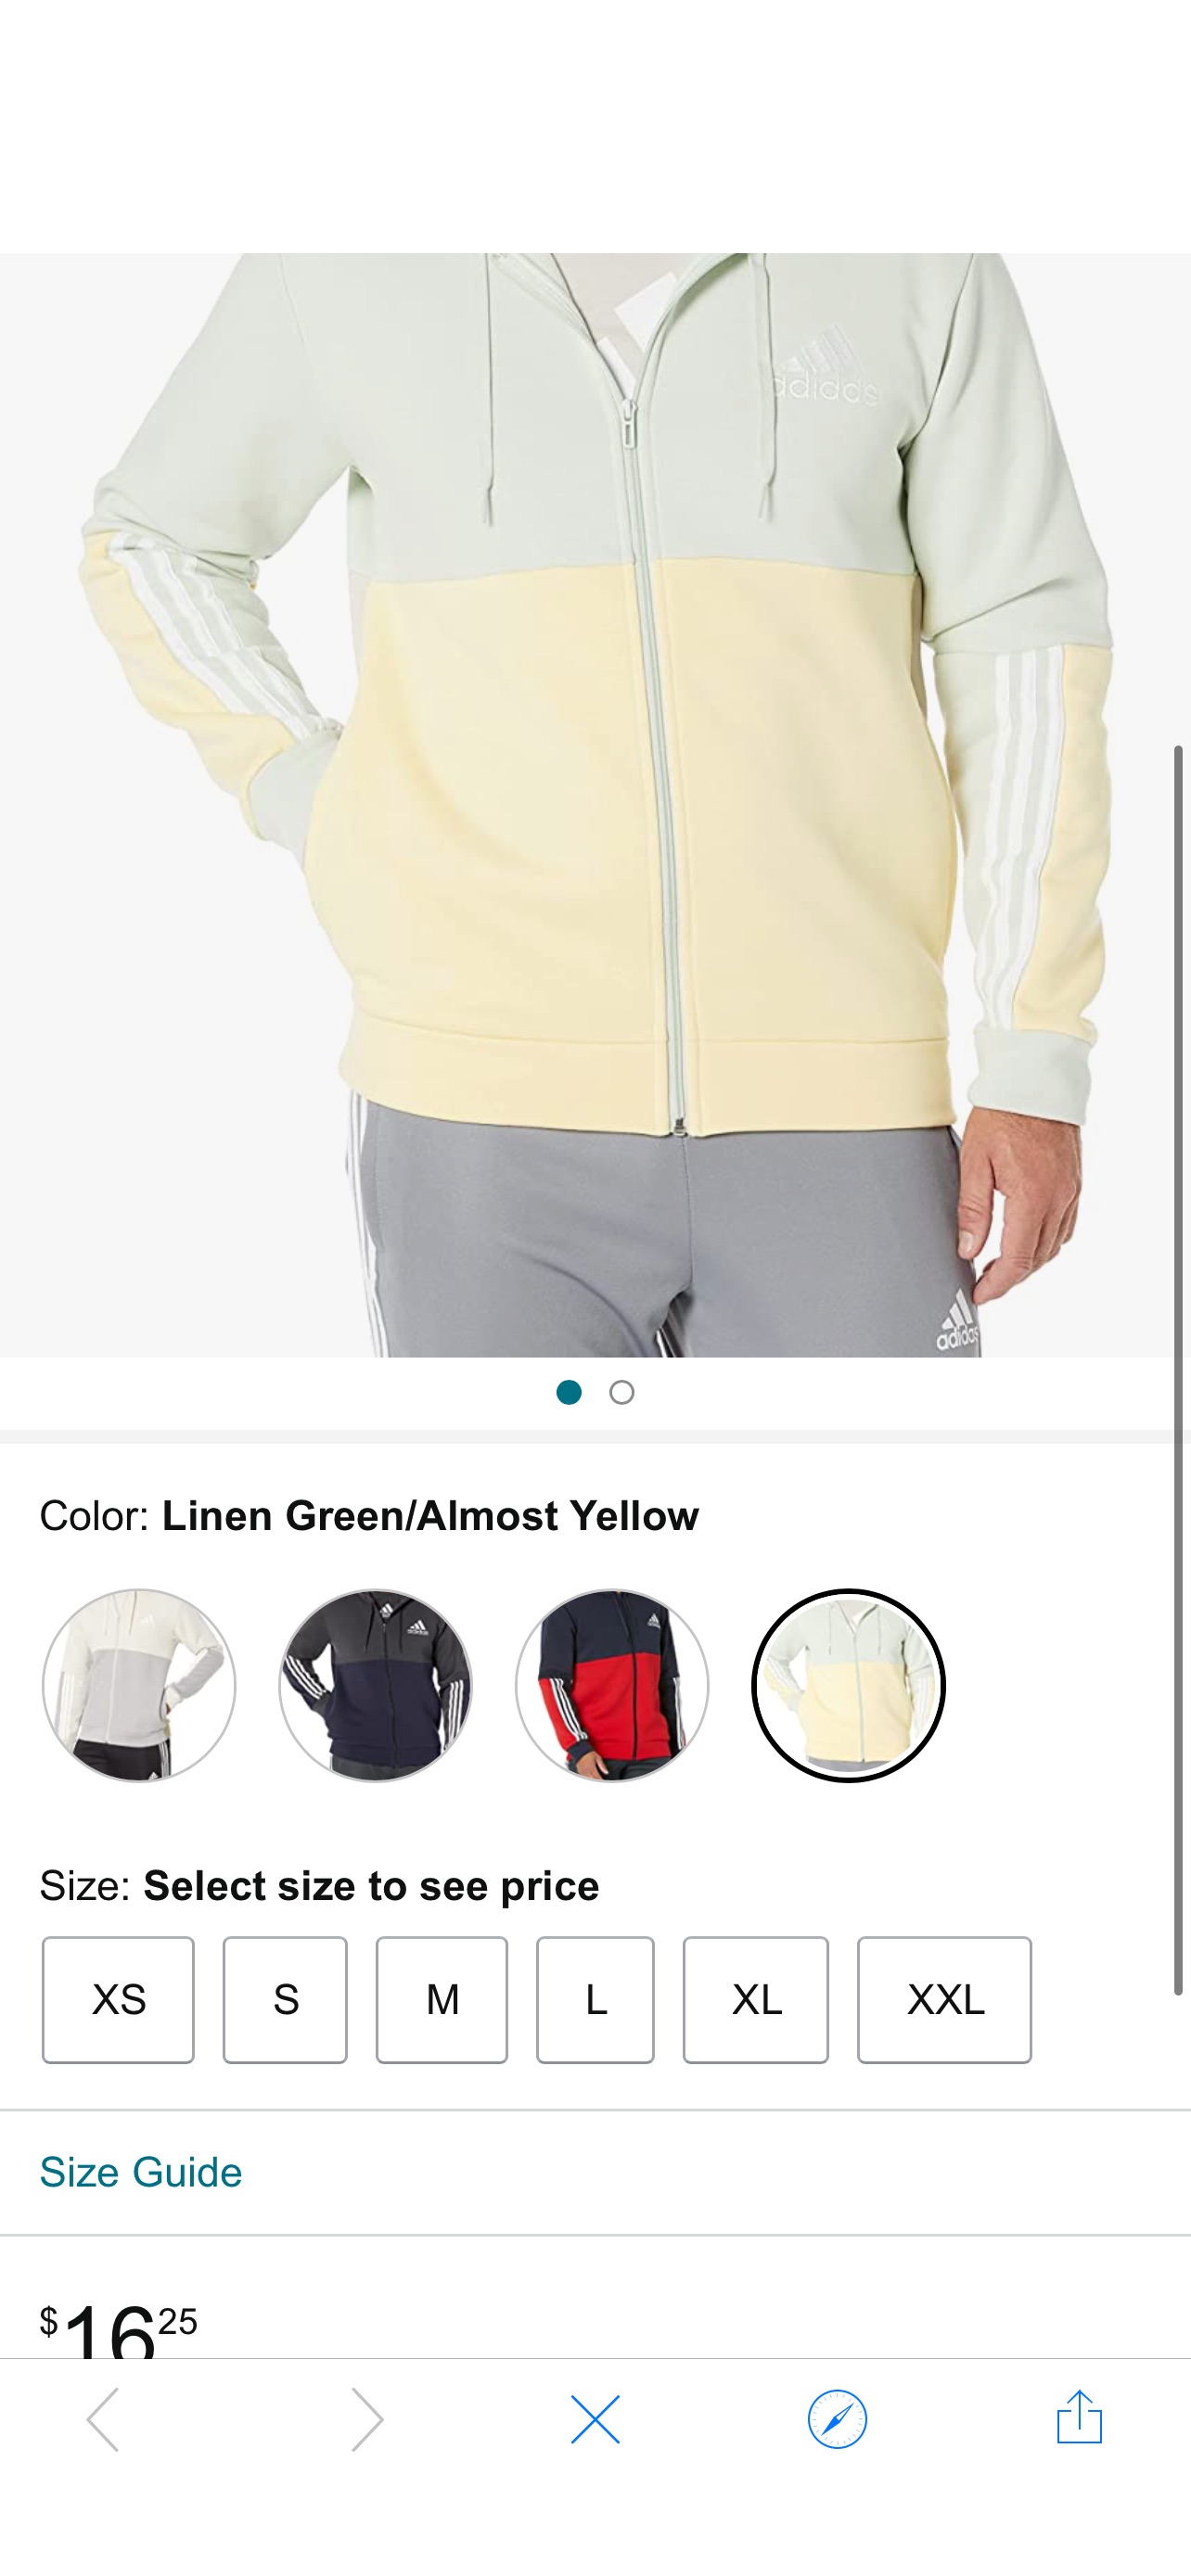 adidas Men's Essentials Colorblock Full Zip Hoodie, Linen Green/Almost Yellow, Large at Amazon Men’s Clothing store